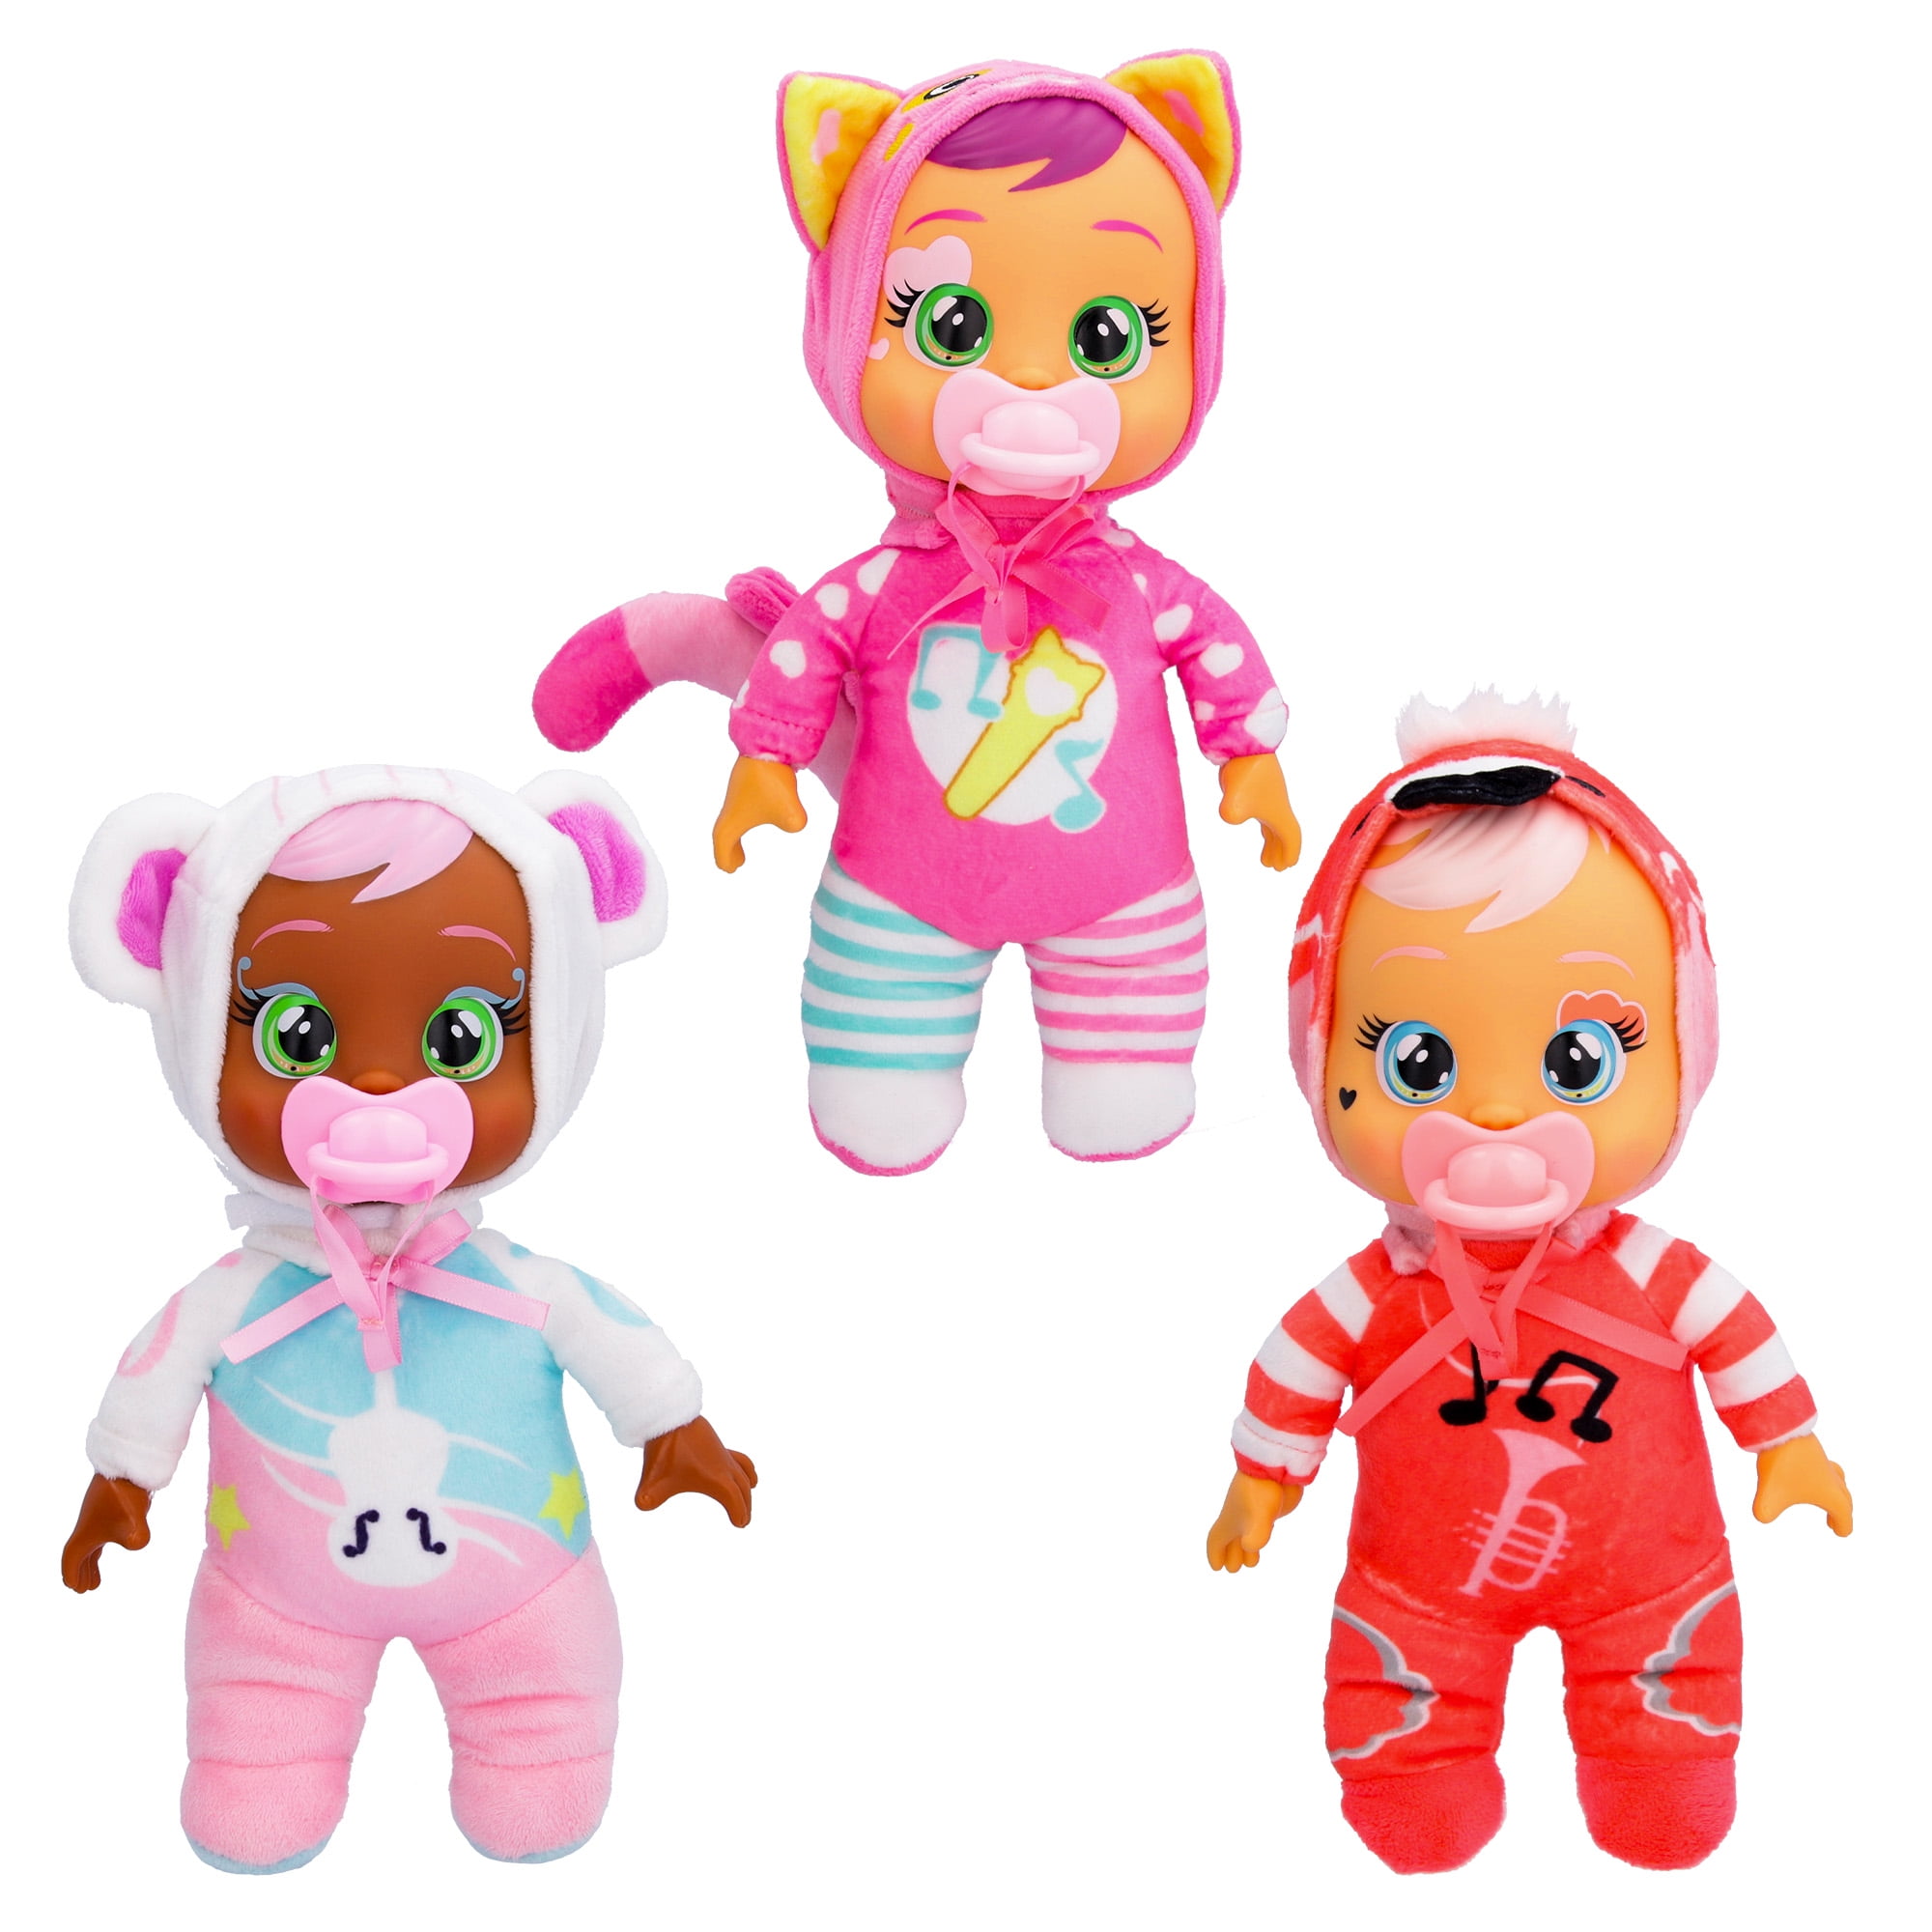 IMC Toys Cry Babies Tiny Cuddles Music Edition 3pk Dolls.  Ages 18+ Months